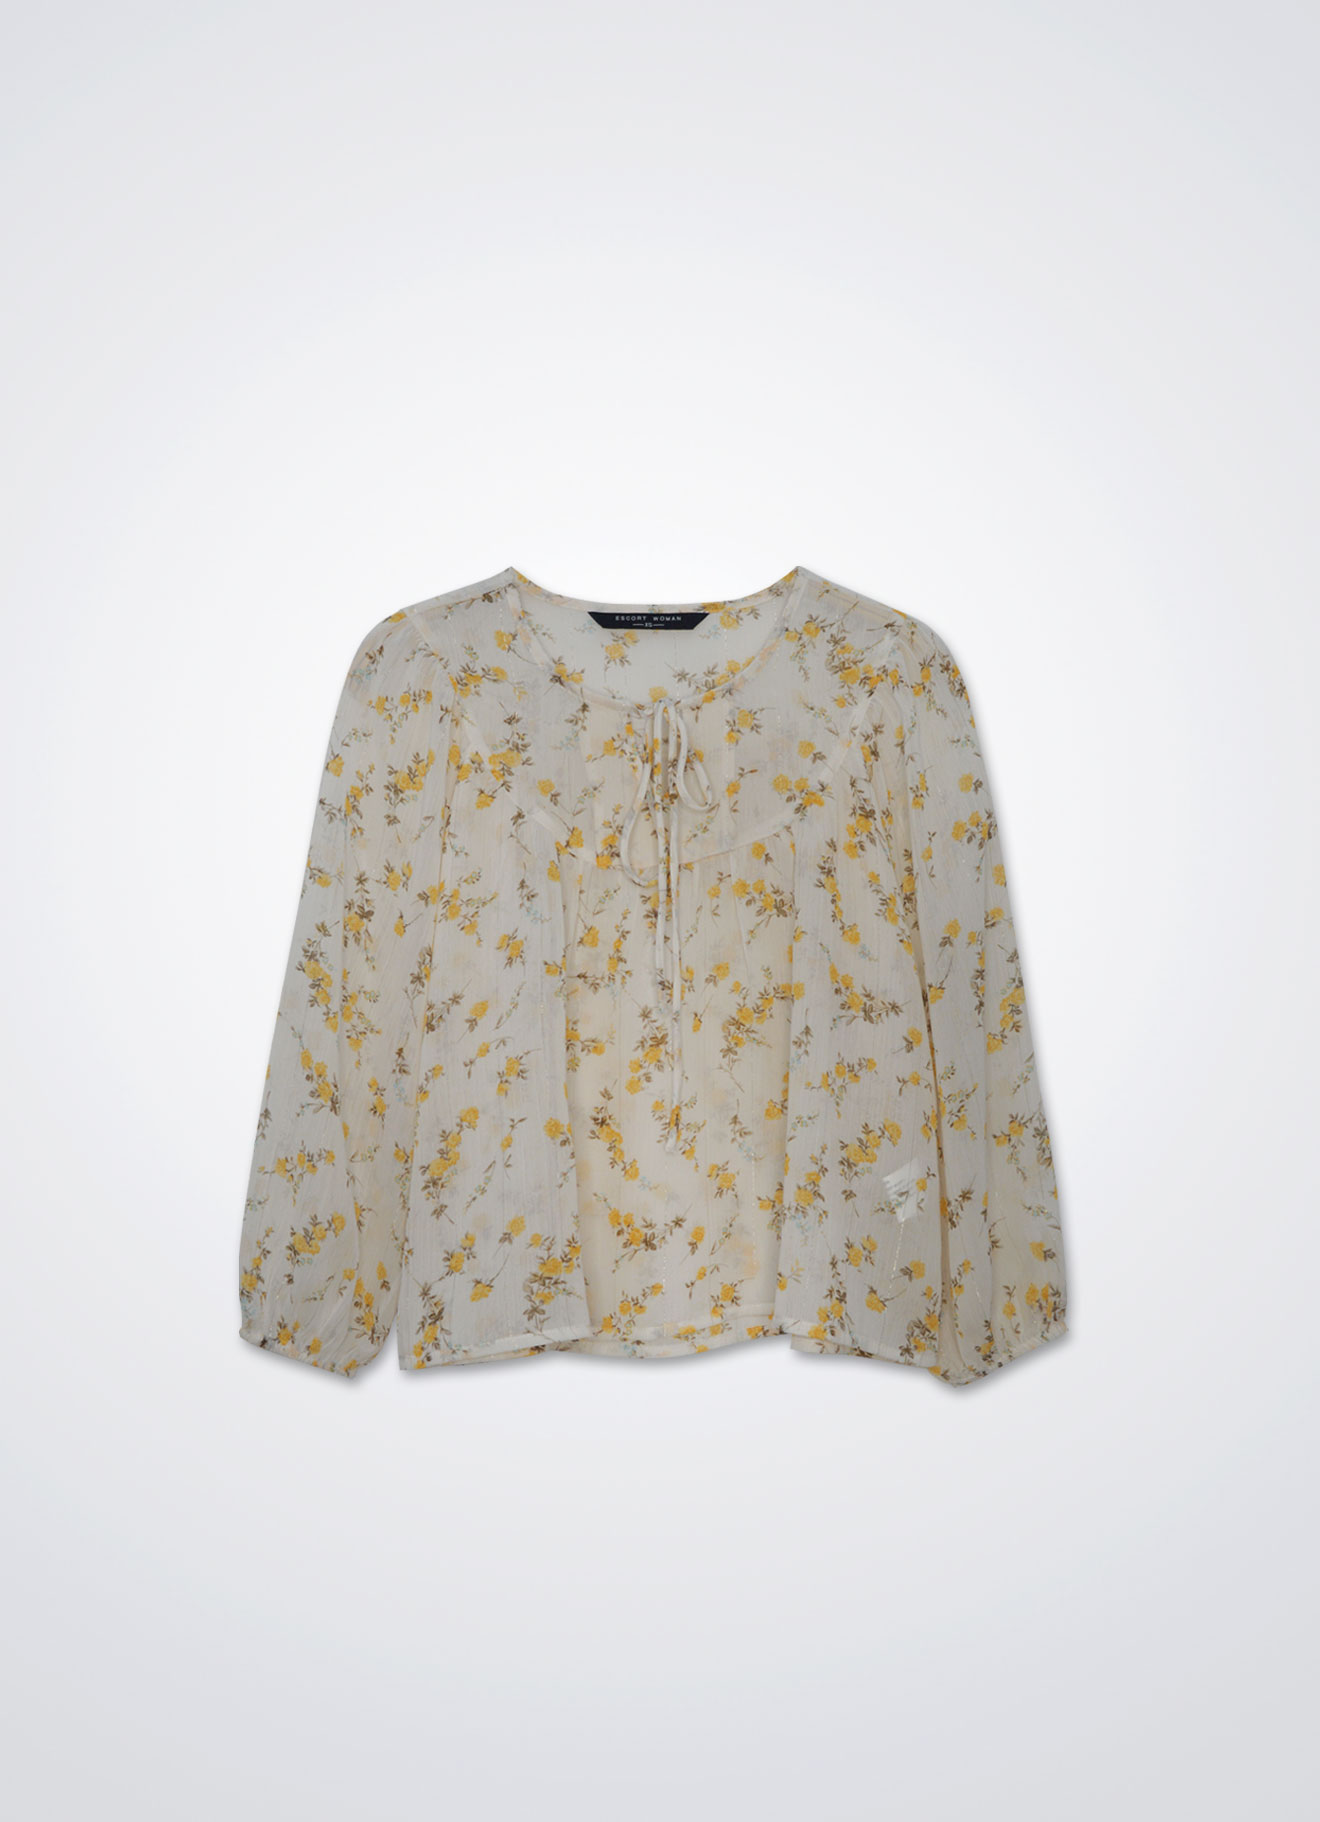 Citrus by Printed Blouse